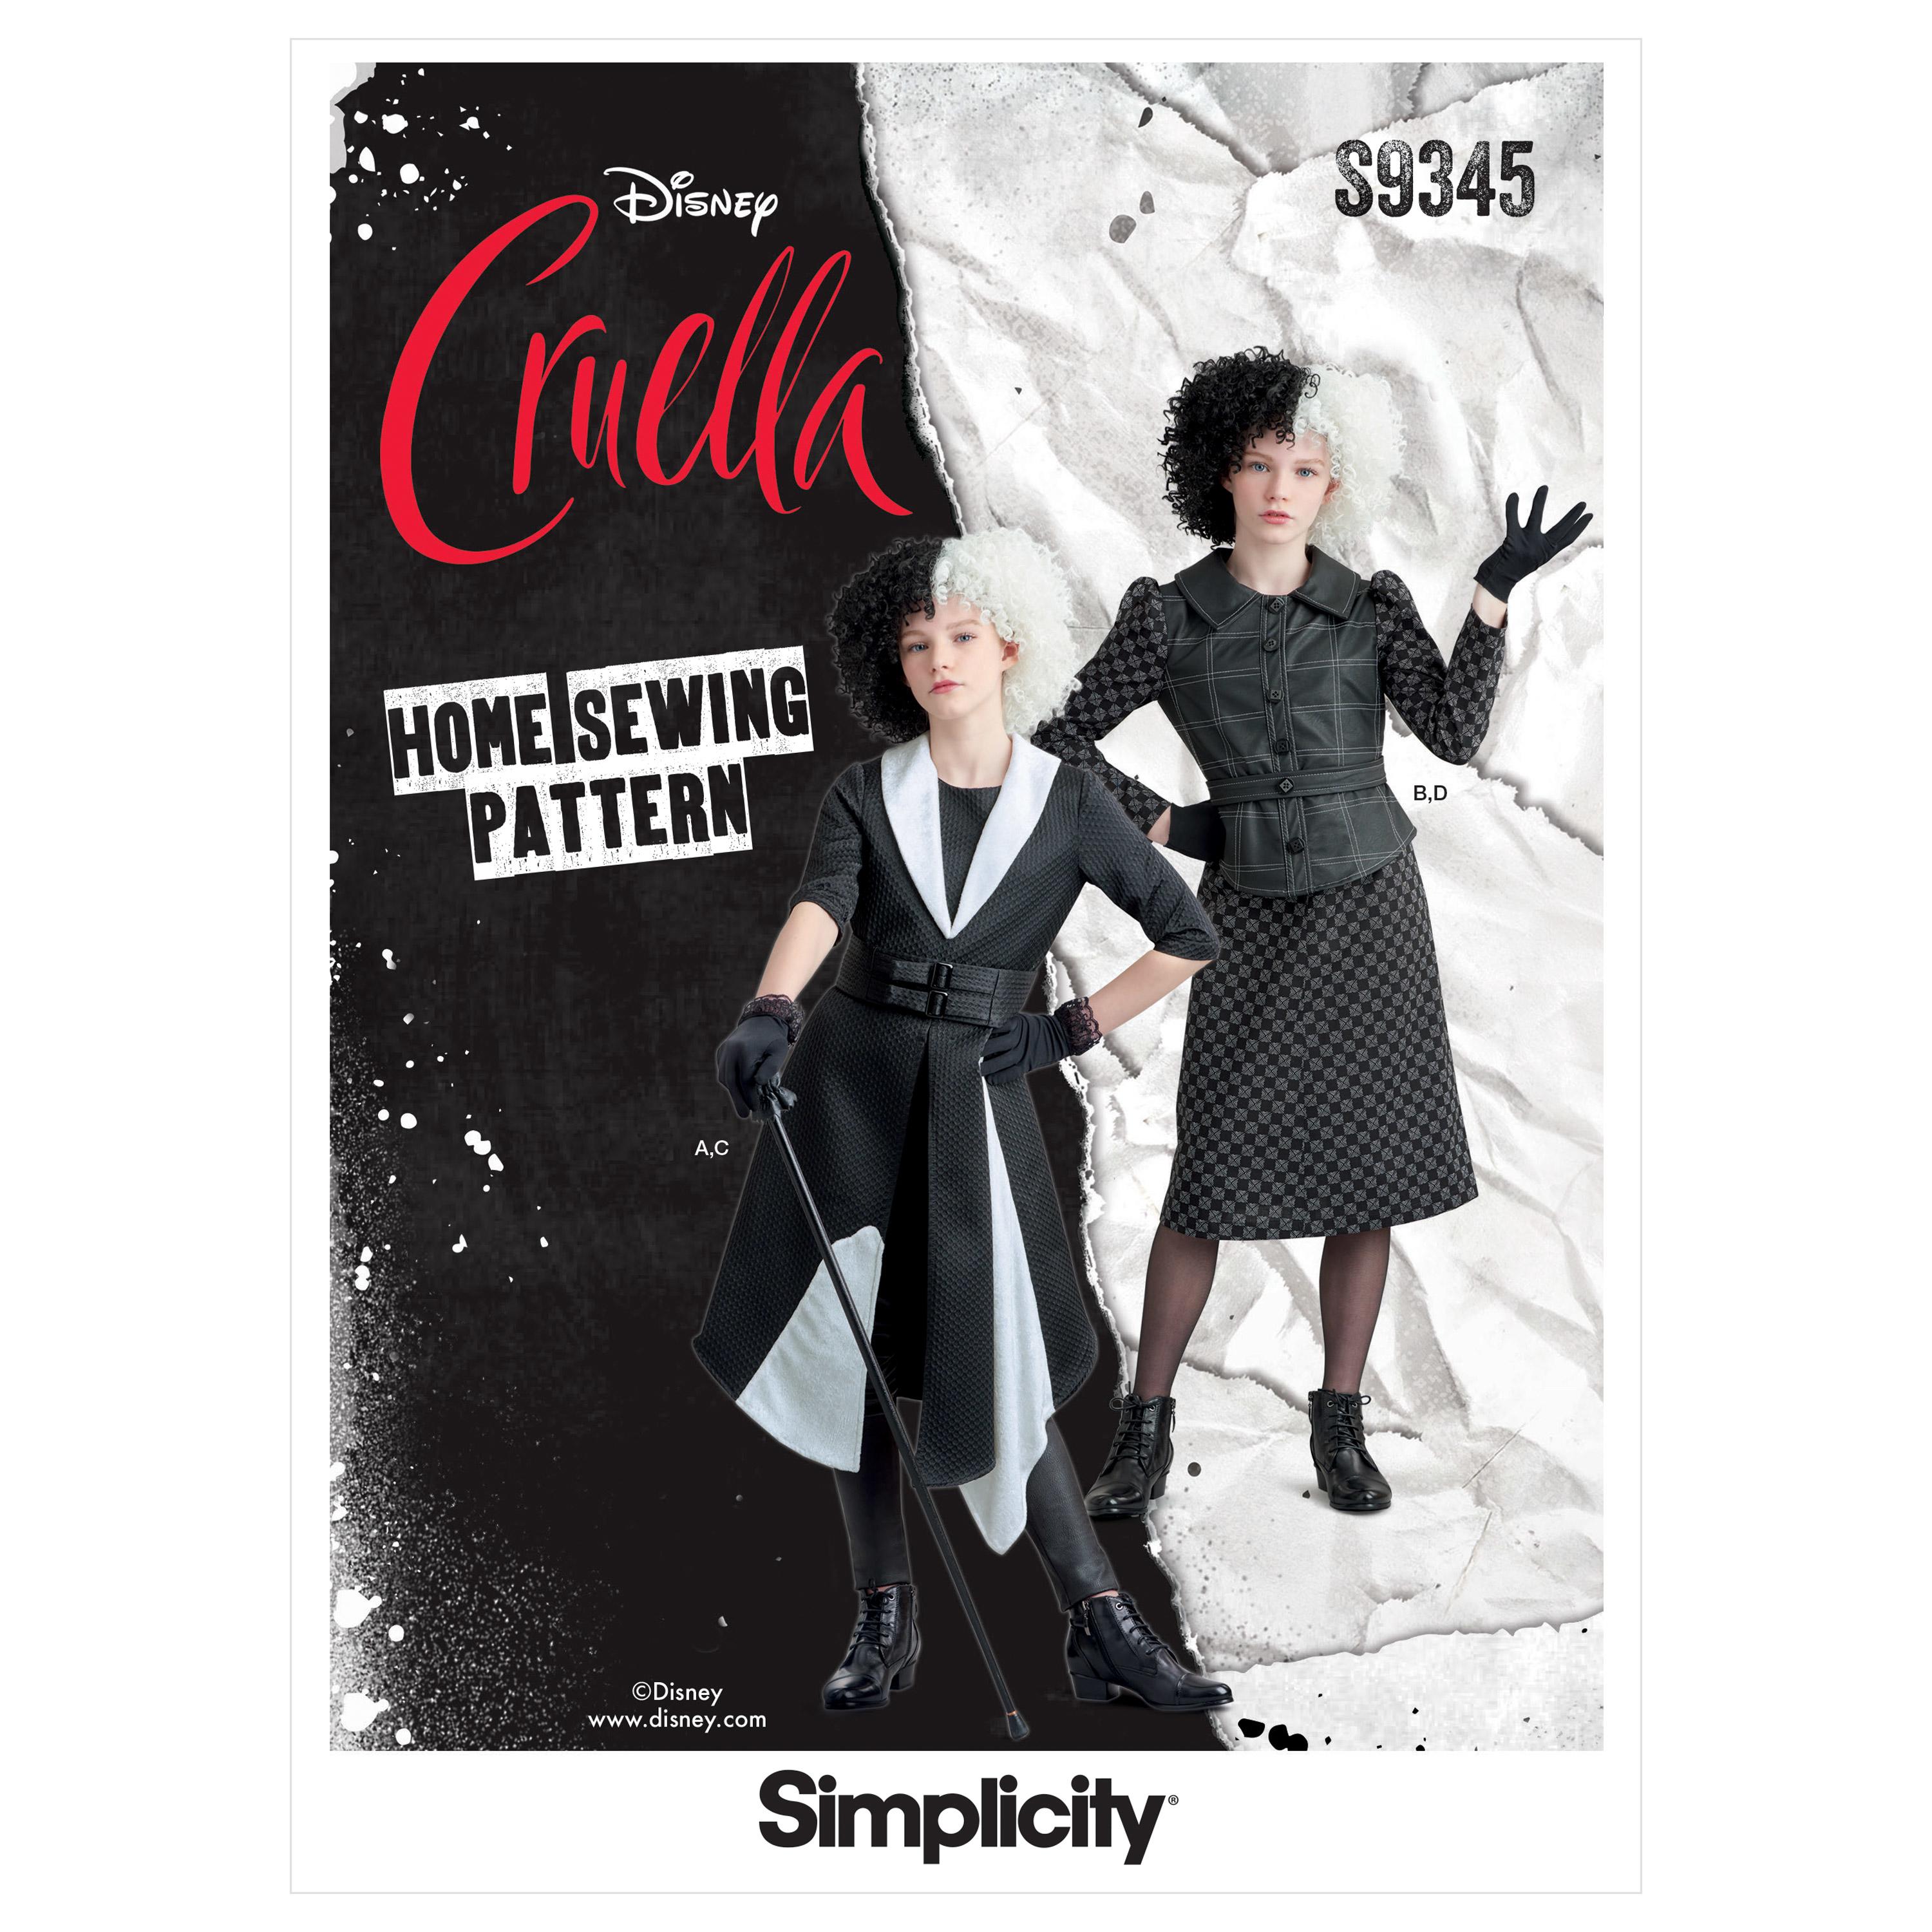 Simplicity Sewing Pattern S9345 Girls' Costumes